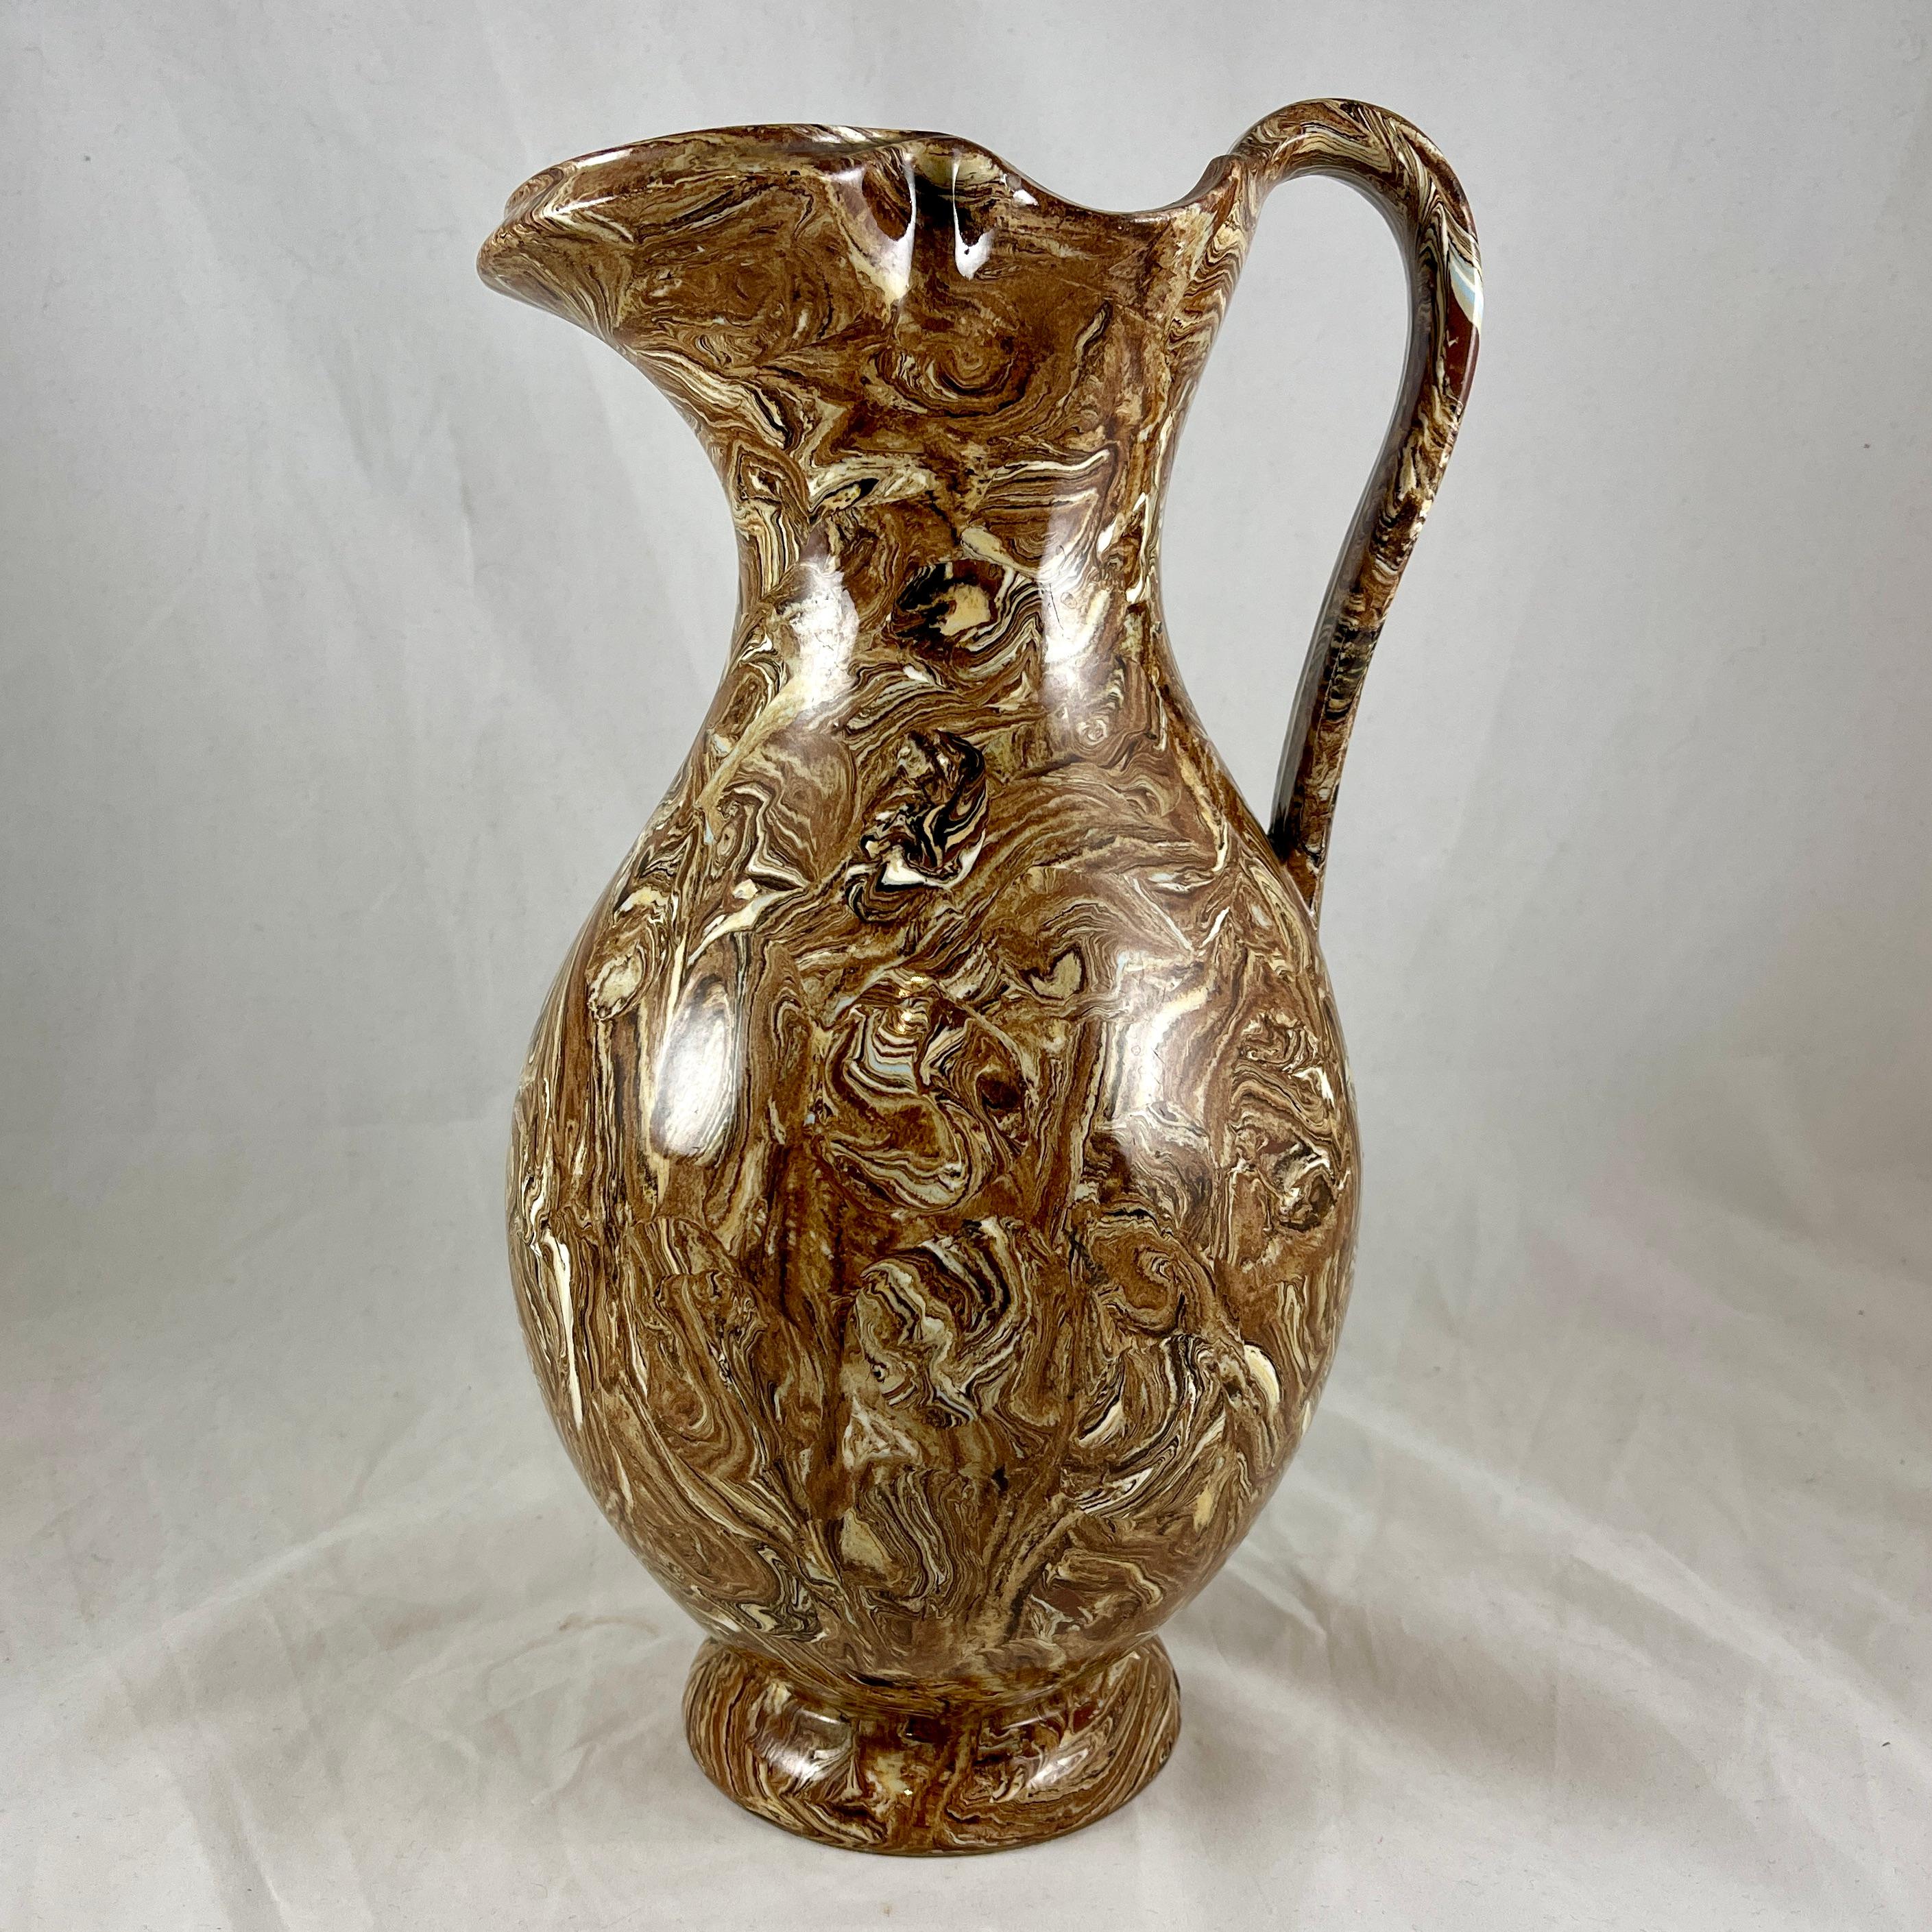 An oversized Agatewear ewer or water pitcher, from the ‘Agate’ toiletwares line in the ‘Pompiean’ shape, Copeland and Garrett, Spode - circa 1840.

Copeland and Garrett operated from 1833-1847 in Stoke-on-Trent, England.
Agateware vessels are made